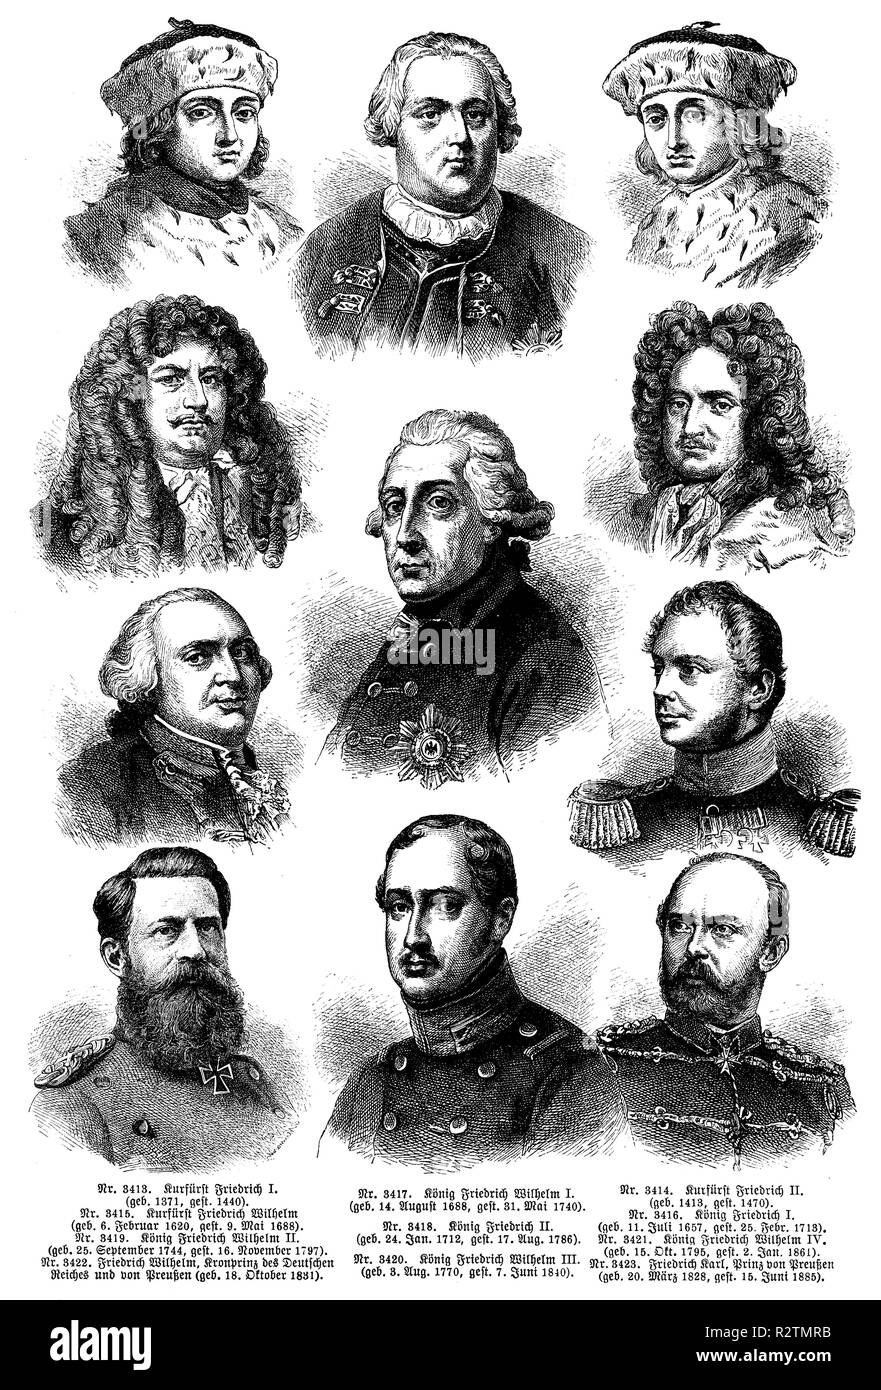 Left top to bottom: Elector Frederick I (born 1371 , died 1440) , Elector Friedrich Wilhelm (born February 6, 1620 , died May 9, 1688 ), King Friedrich Wilhelm II (born September 25, 1744 , died November 16, 1797 ), Friedrich Wilhelm , Crown Prince of the German Empire and of Prussia (born October 18, 1831 ) . Middle top to bottom: King Frederick William I (b. August 14, 1688 , died May 31, 1740 ), King Frederick II (born January 24, 1712 , died August 17, 1786 ), King Friedrich Wilhelm III . (born August 3, 1770 , died June 7, 1840 ) . Right top to bottom: Elector Frederick II (born 1413 , di Stock Photo